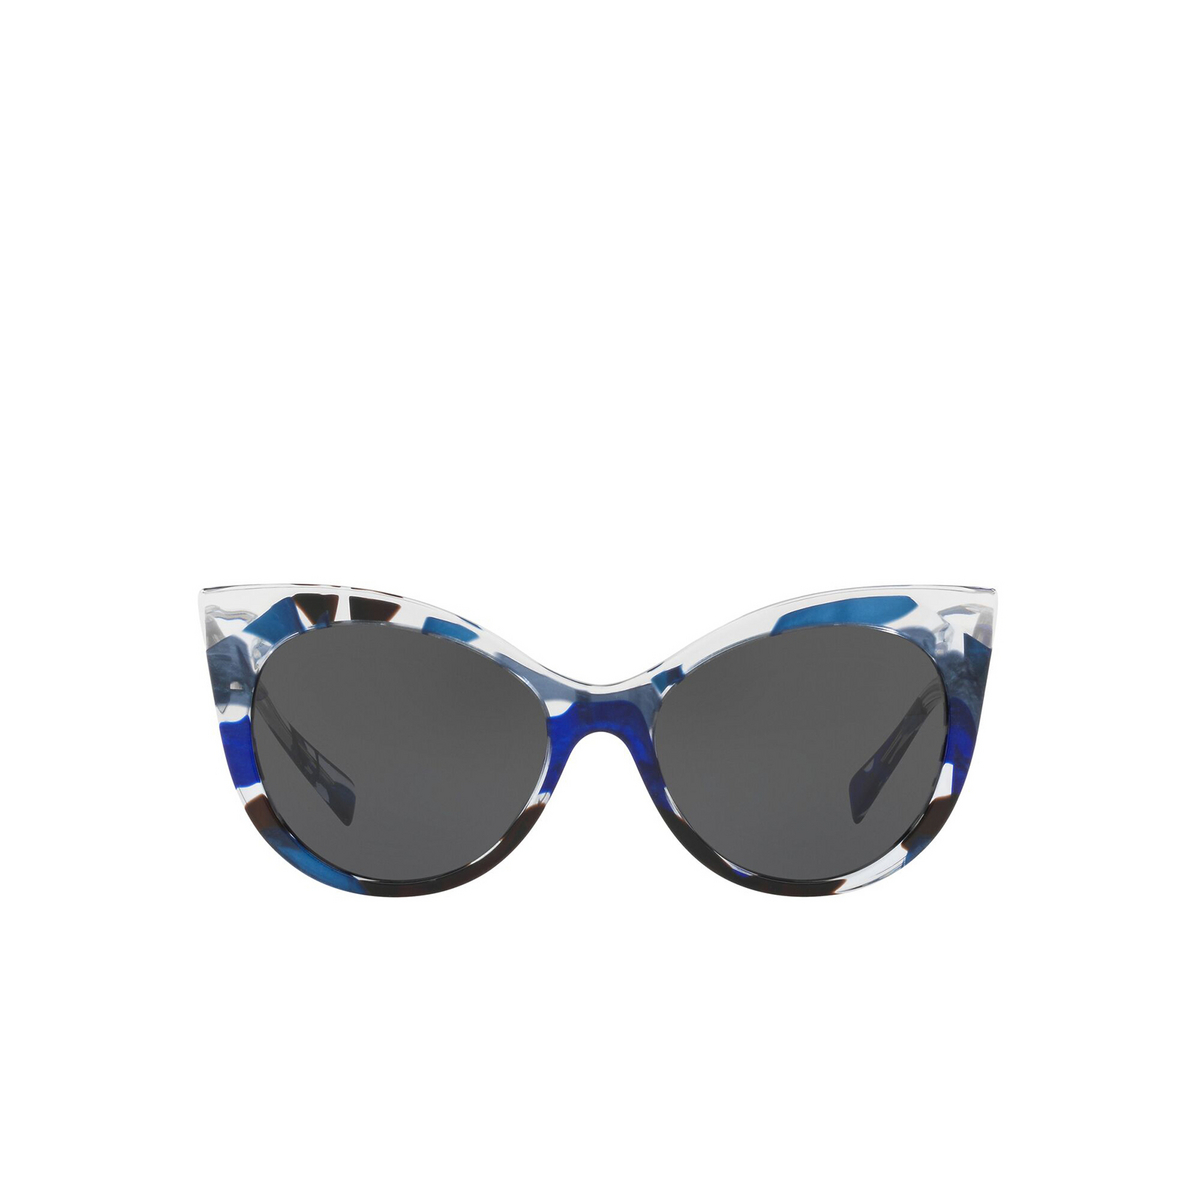 Alain Mikli® Butterfly Sunglasses: Leala A05032 color Crystal Waves Black Blue 002/87 - front view.